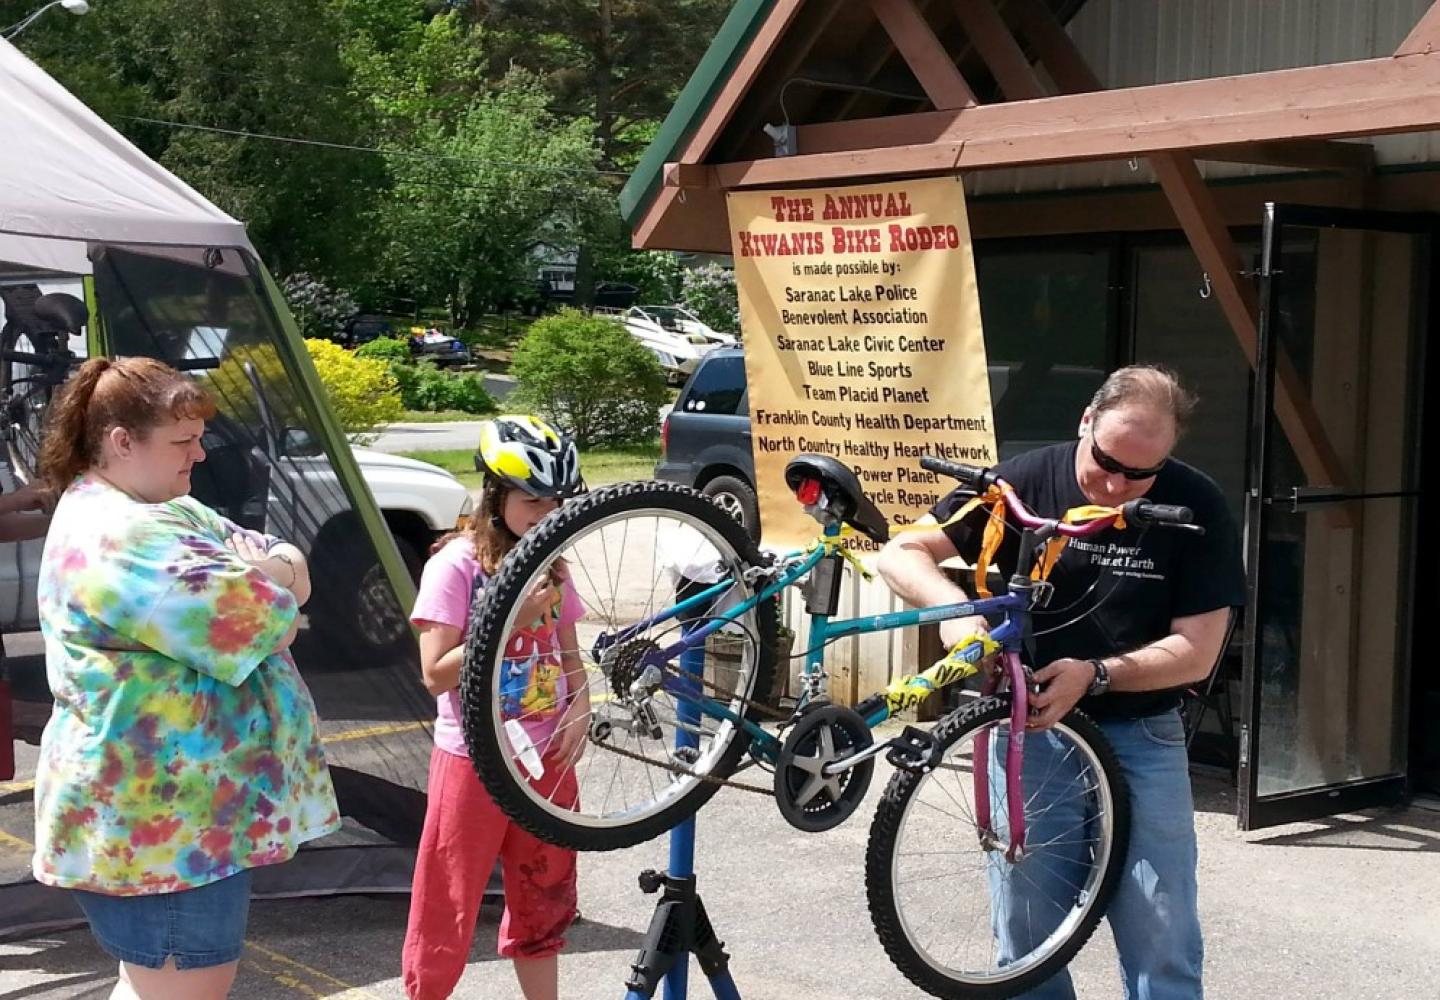 One of the ways those funds are spent is hosting an annual bicycle rodeo.